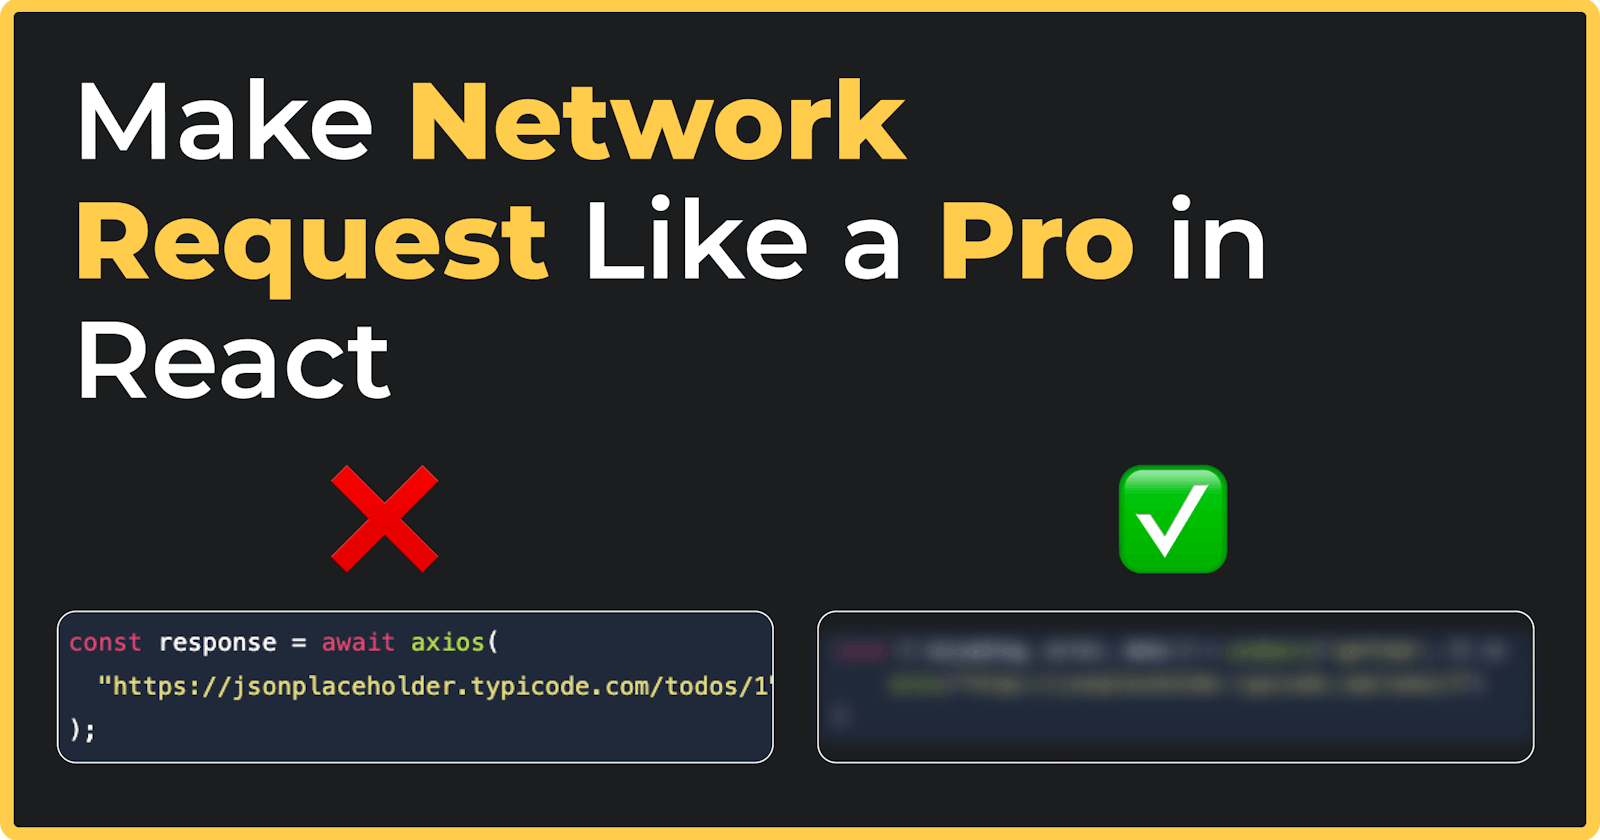 Make Network Requests in React like a PRO 📈